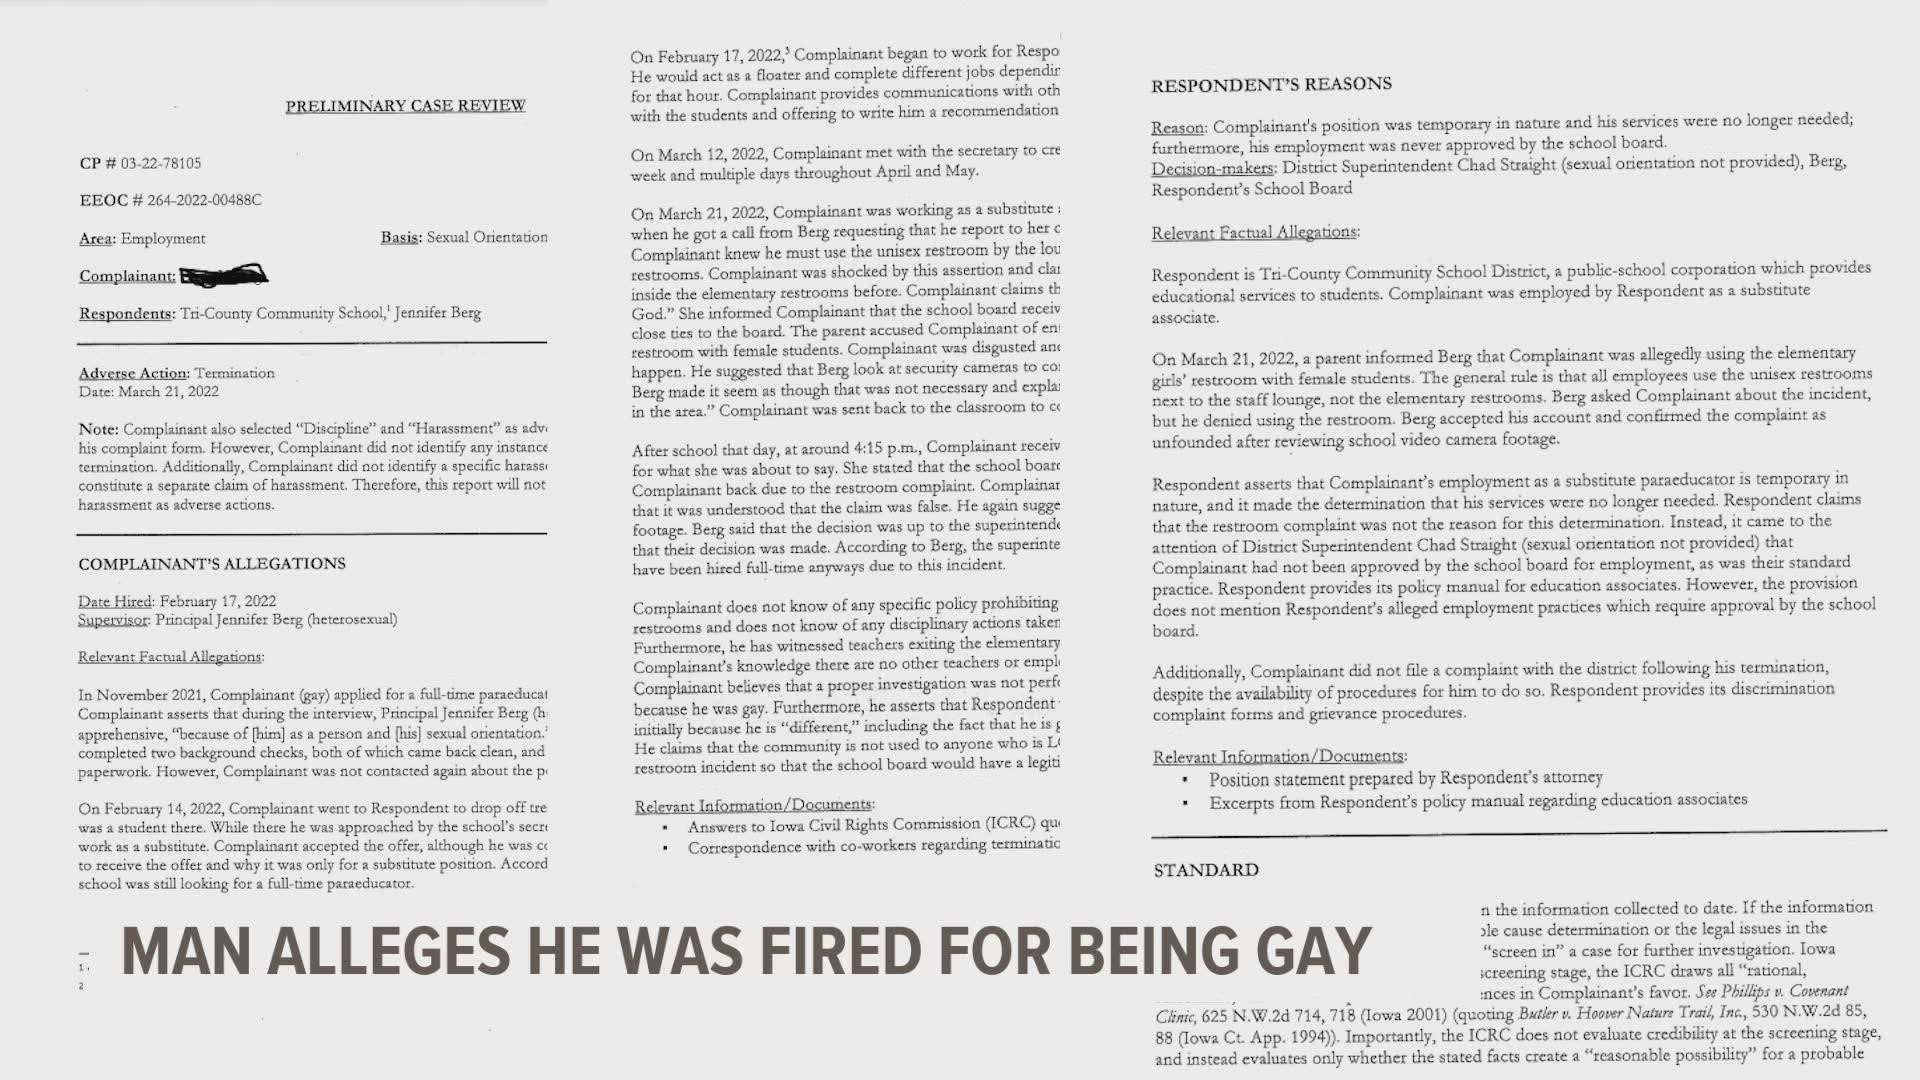 Attorney Ben Lynch says his client was fired in March 2022 for being gay. The school district claims the job was temporary and "his services were no longer needed.